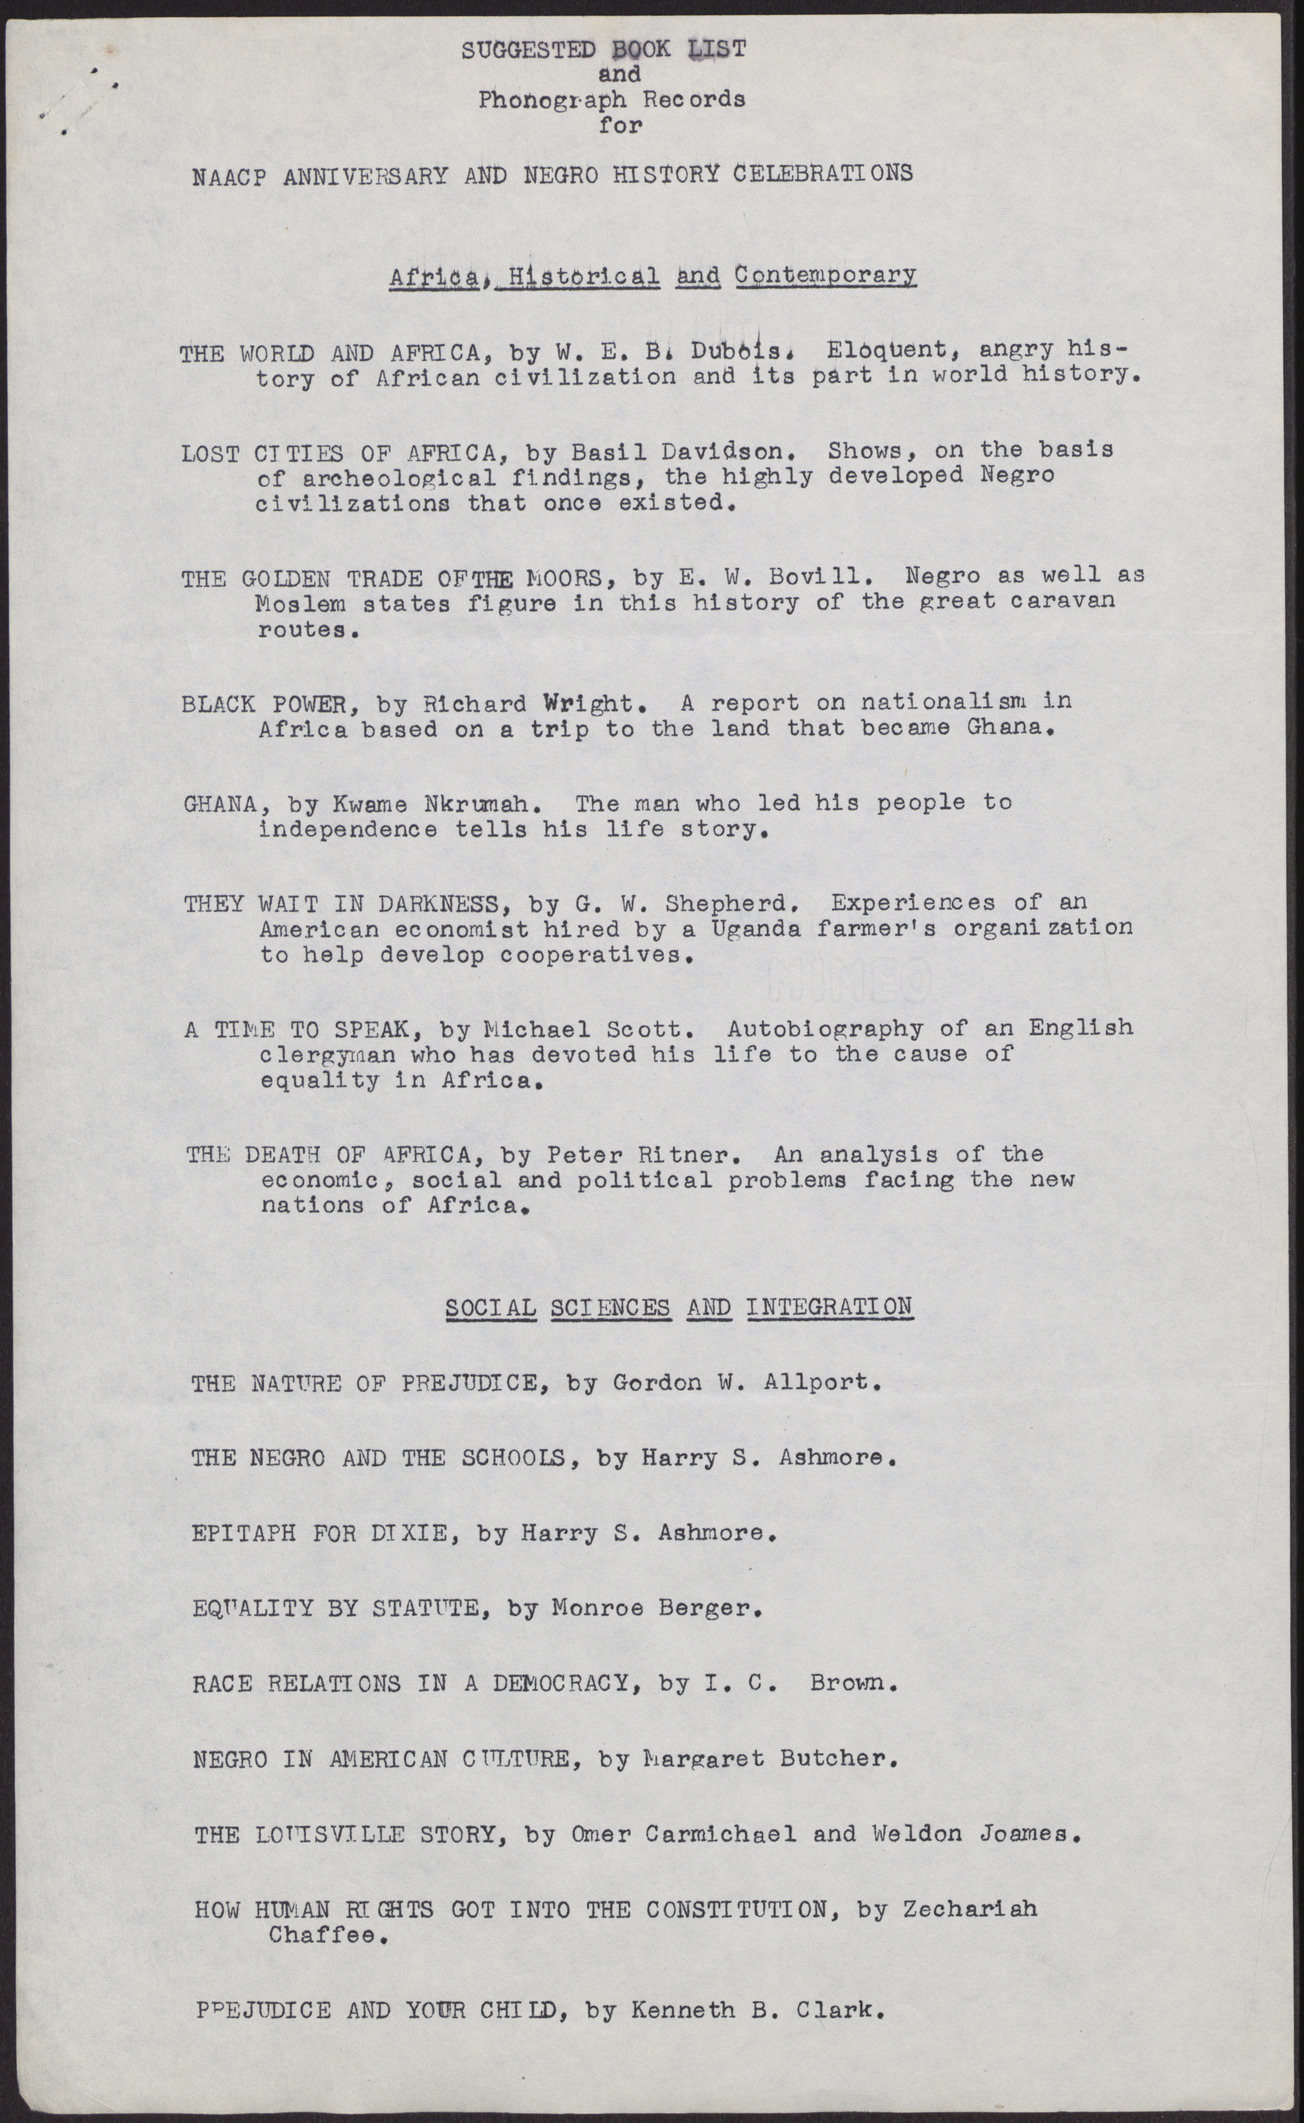 Suggested book list and phonograph records for the NAACP Anniversary and Negro History Celebrations (4 pages), no date